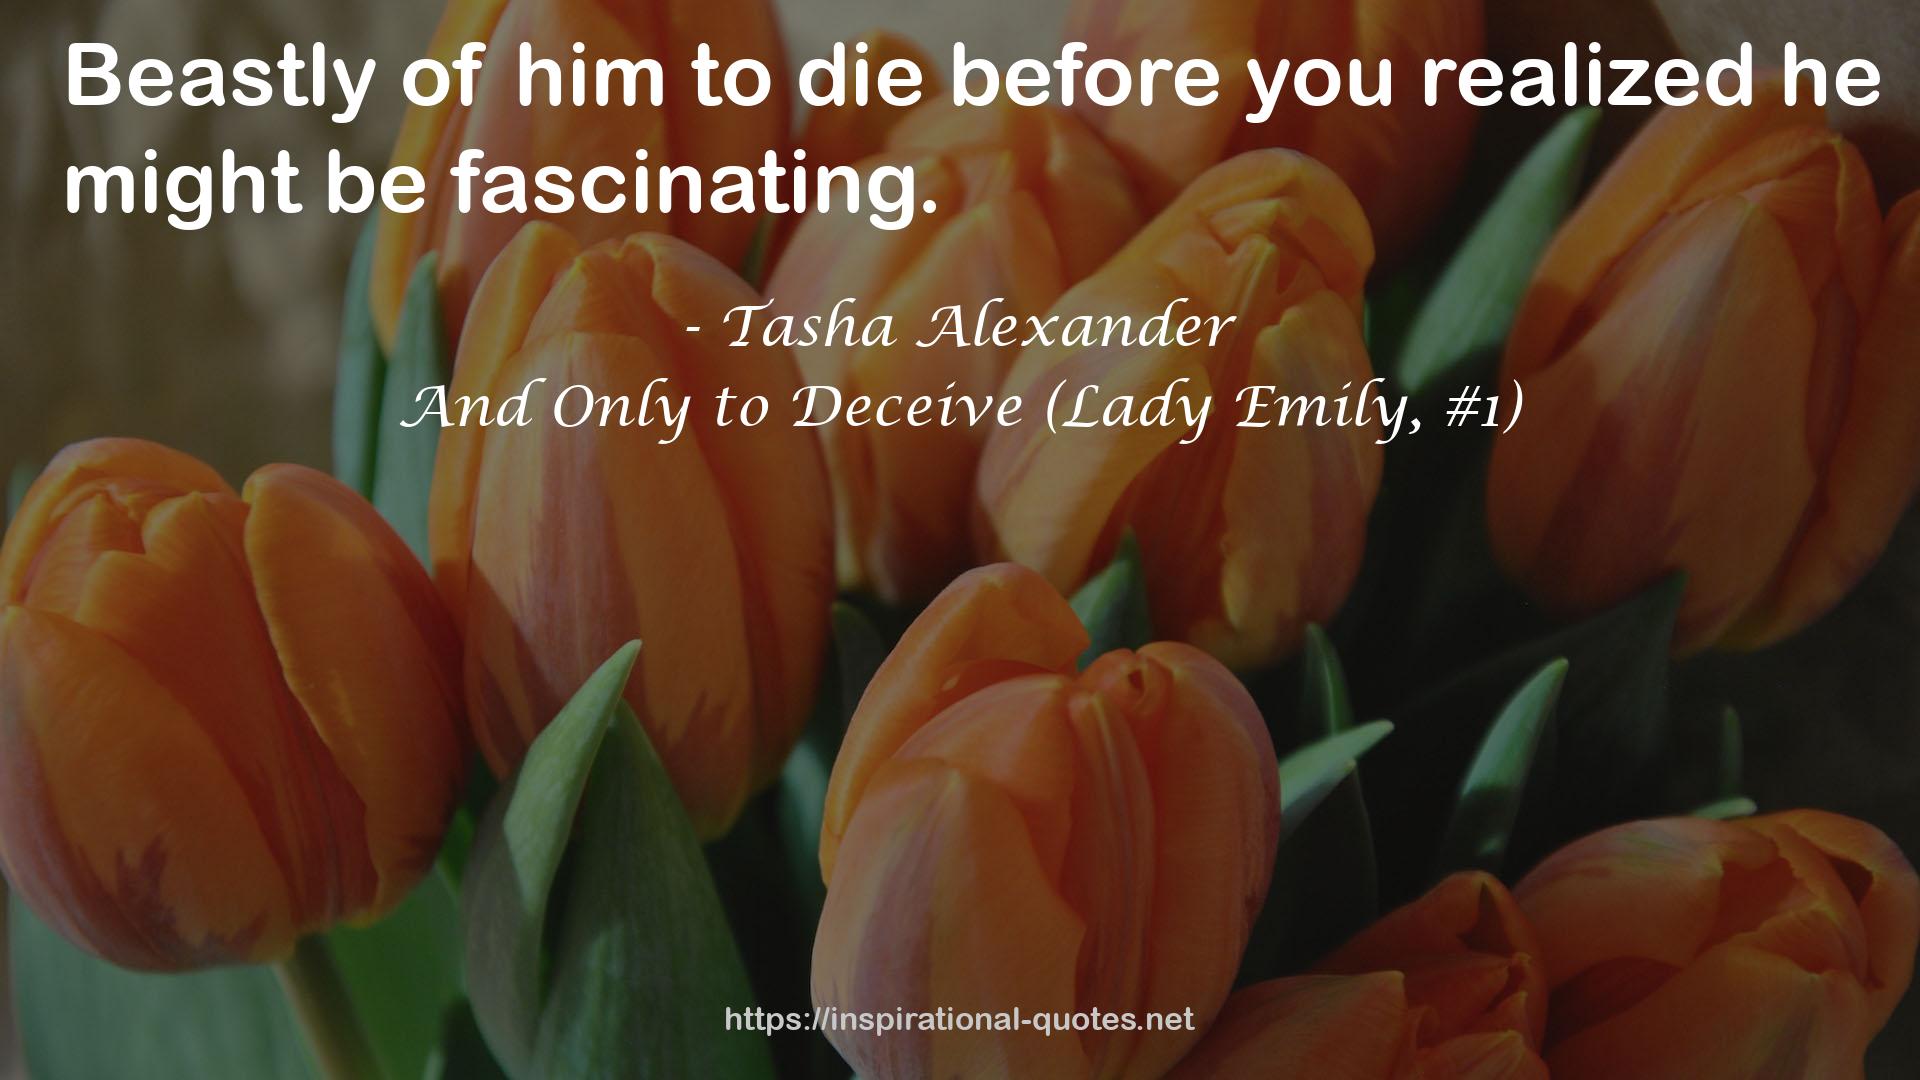 And Only to Deceive (Lady Emily, #1) QUOTES